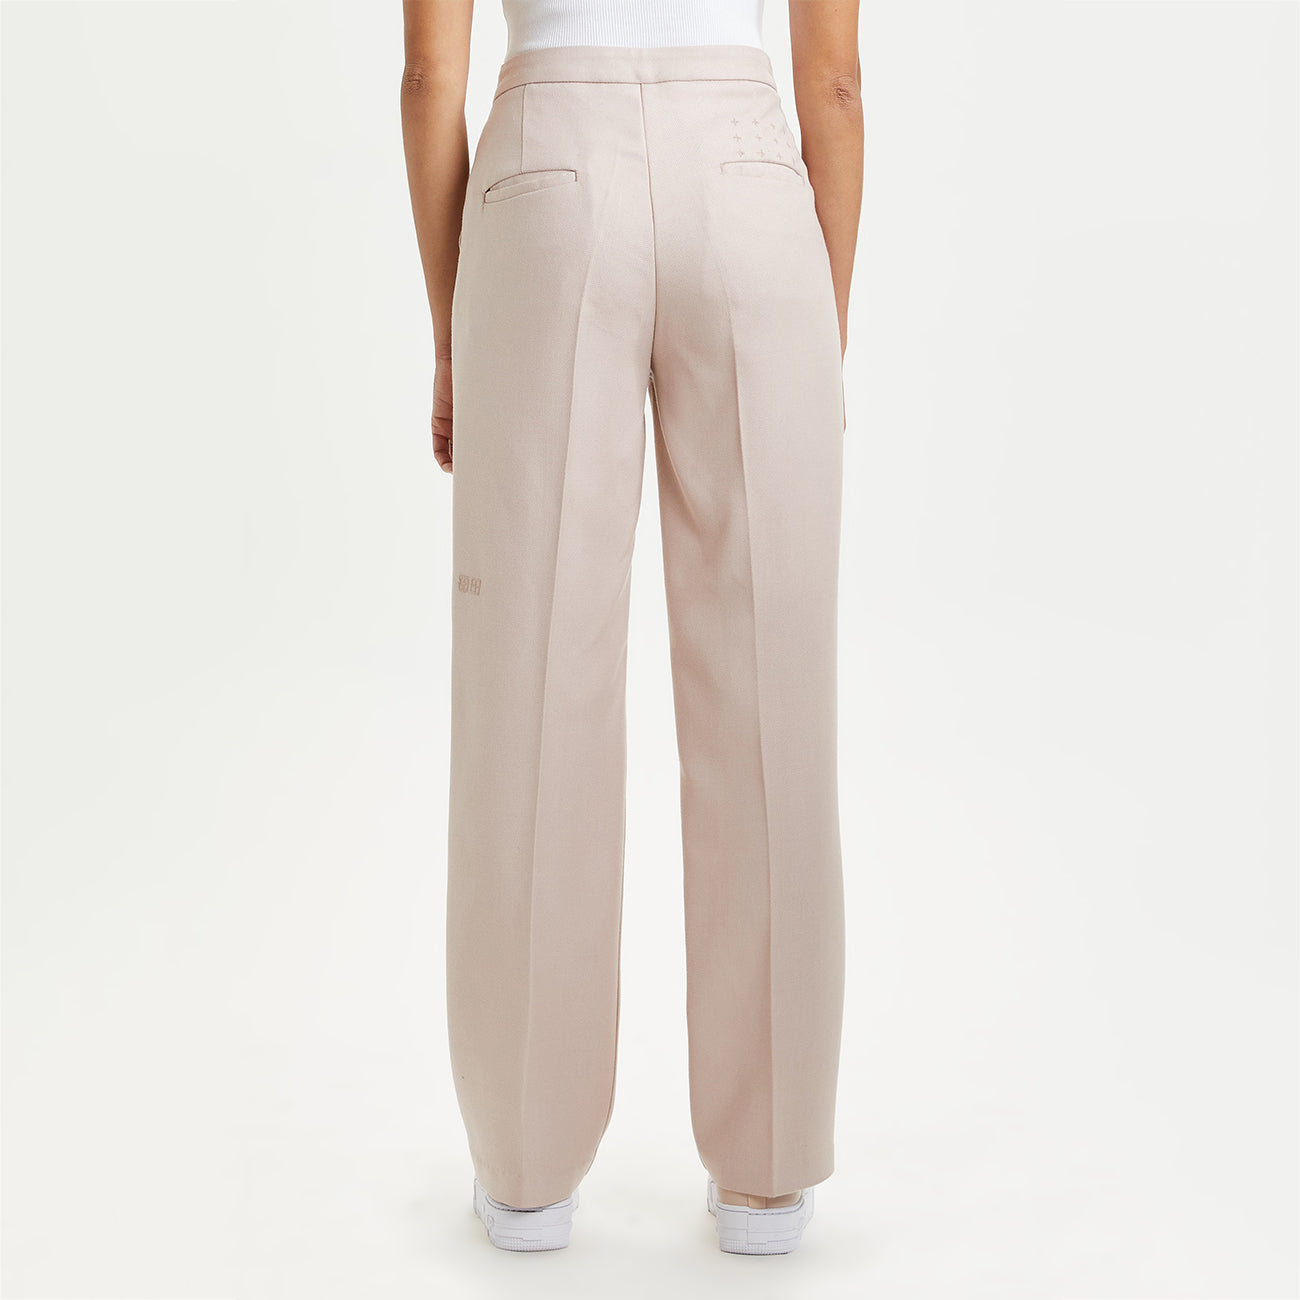 W BONNIE PANT DUSTED PINK